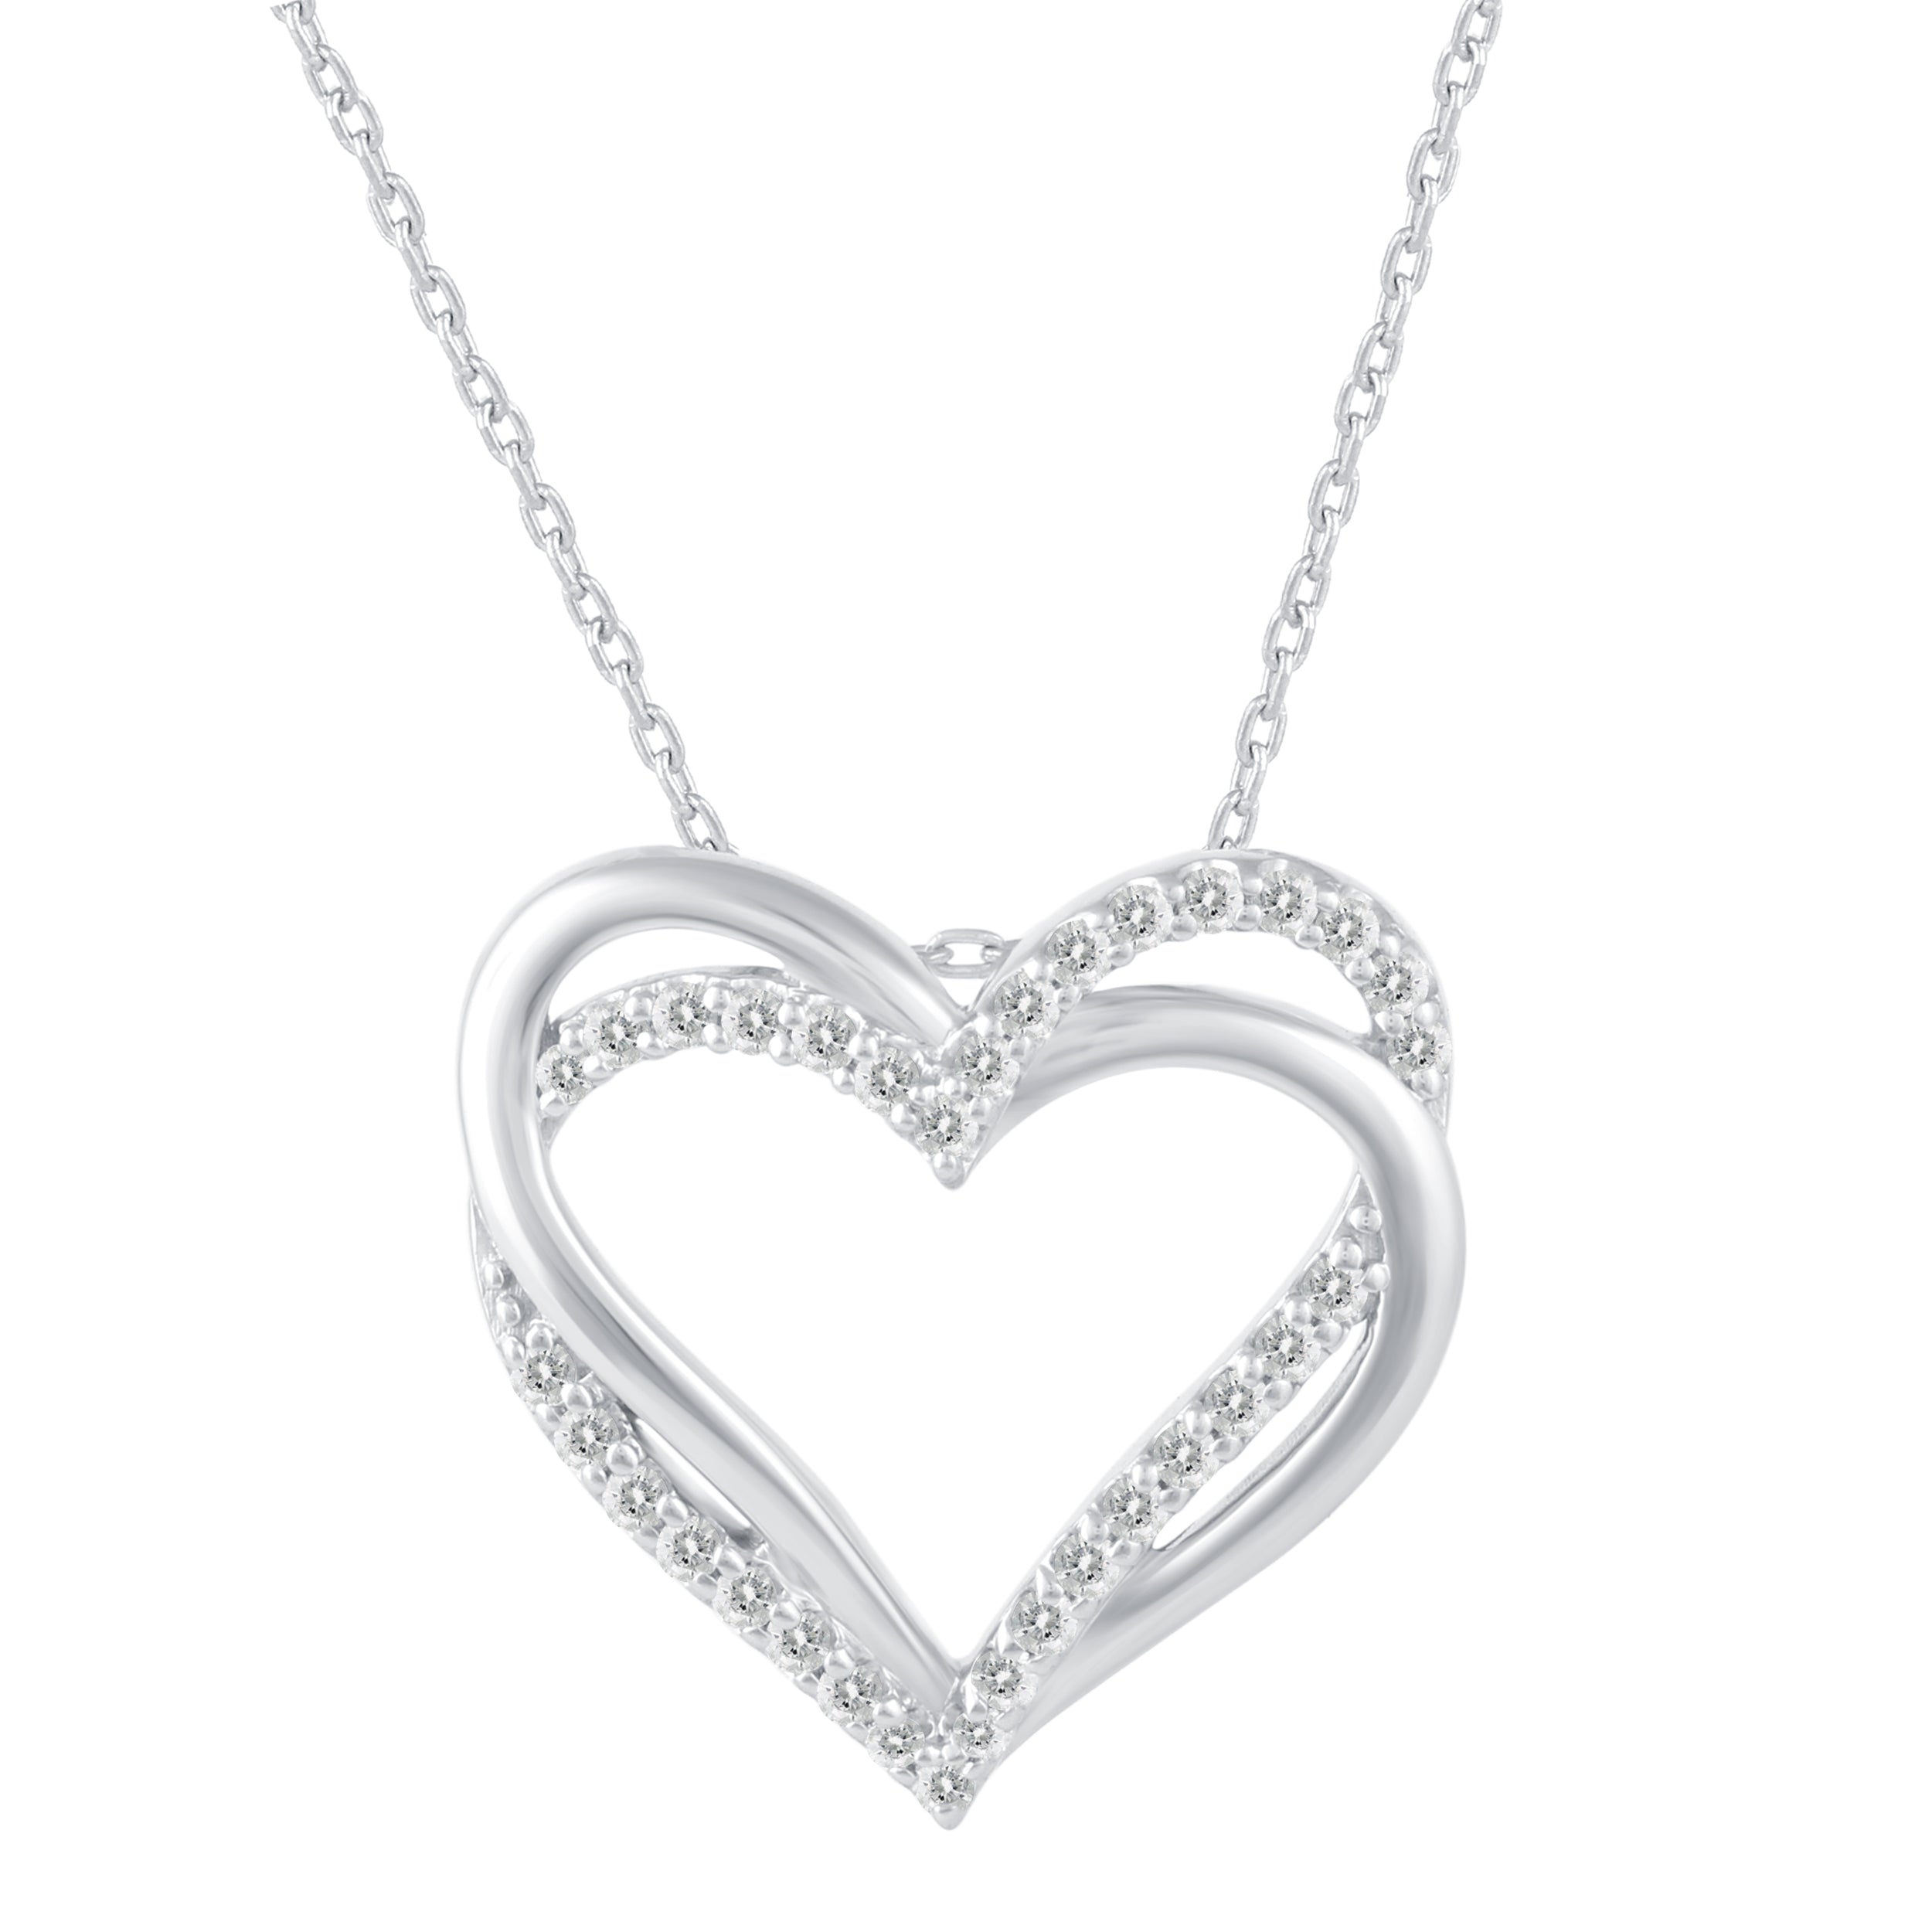 Sparkling Entwined Hearts Charm | Sterling silver | Pandora US